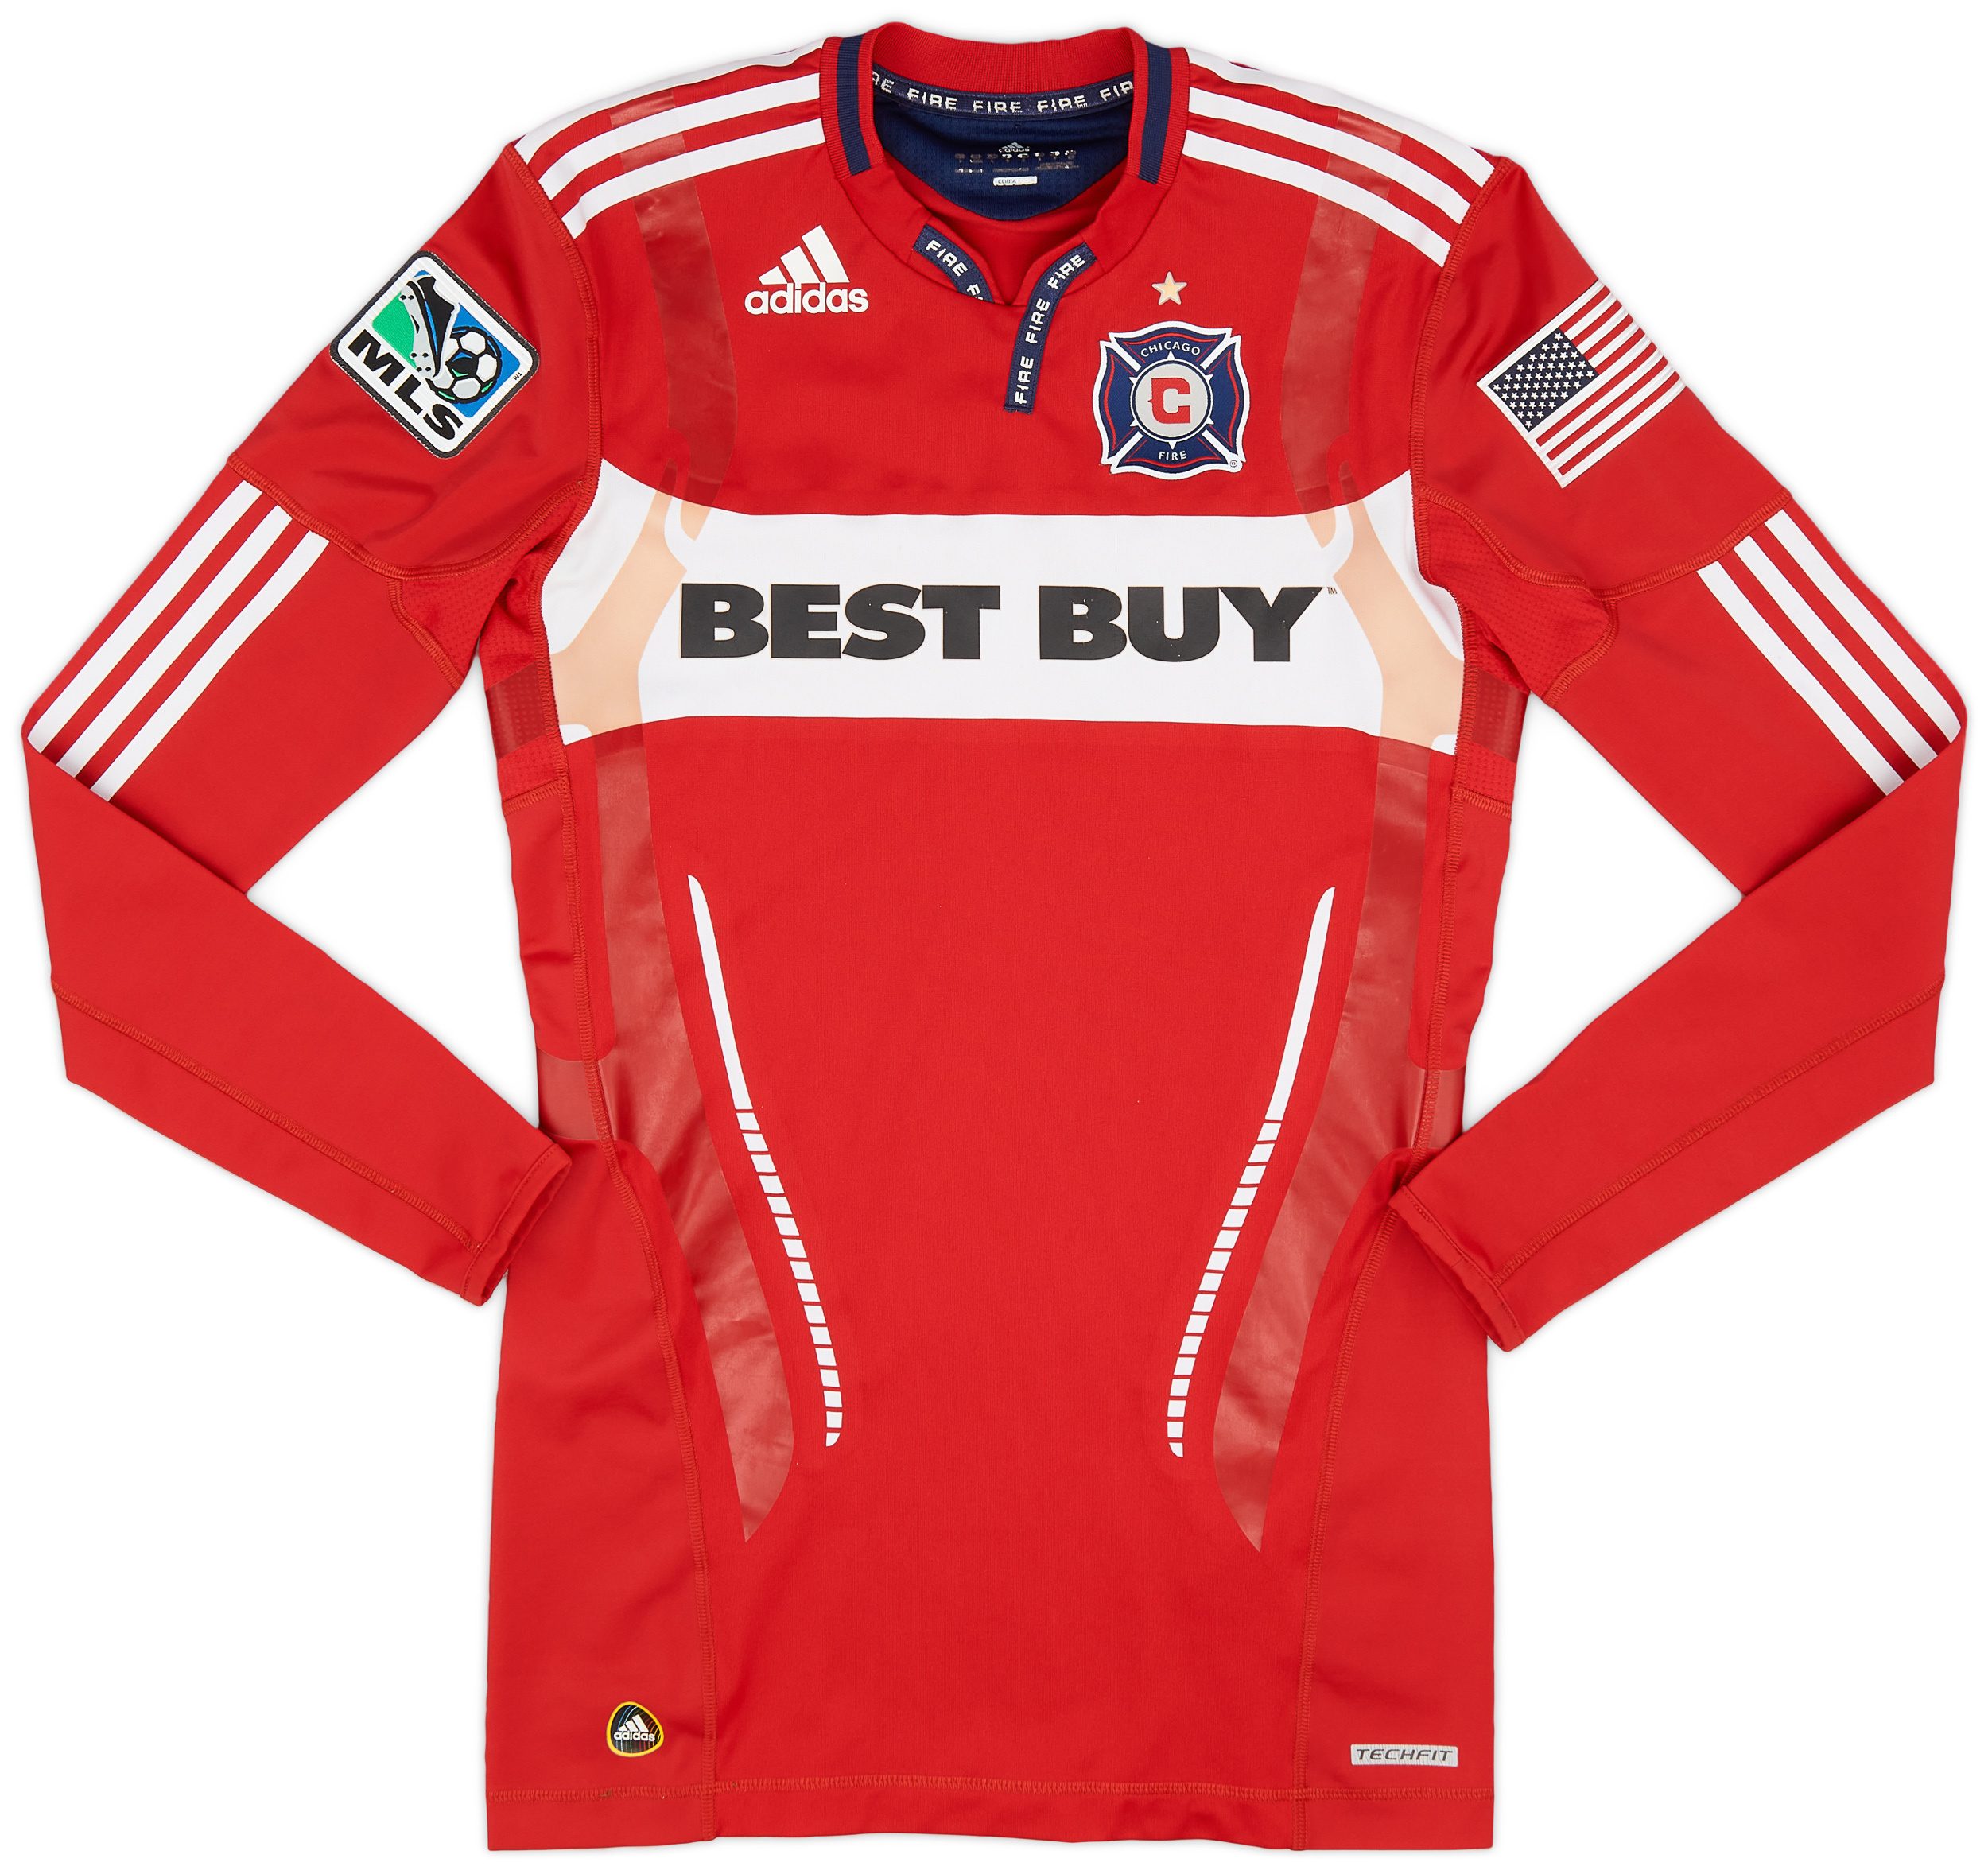 2010 Chicago Fire Player Issue Techfit Home Shirt - 8/10 - ()